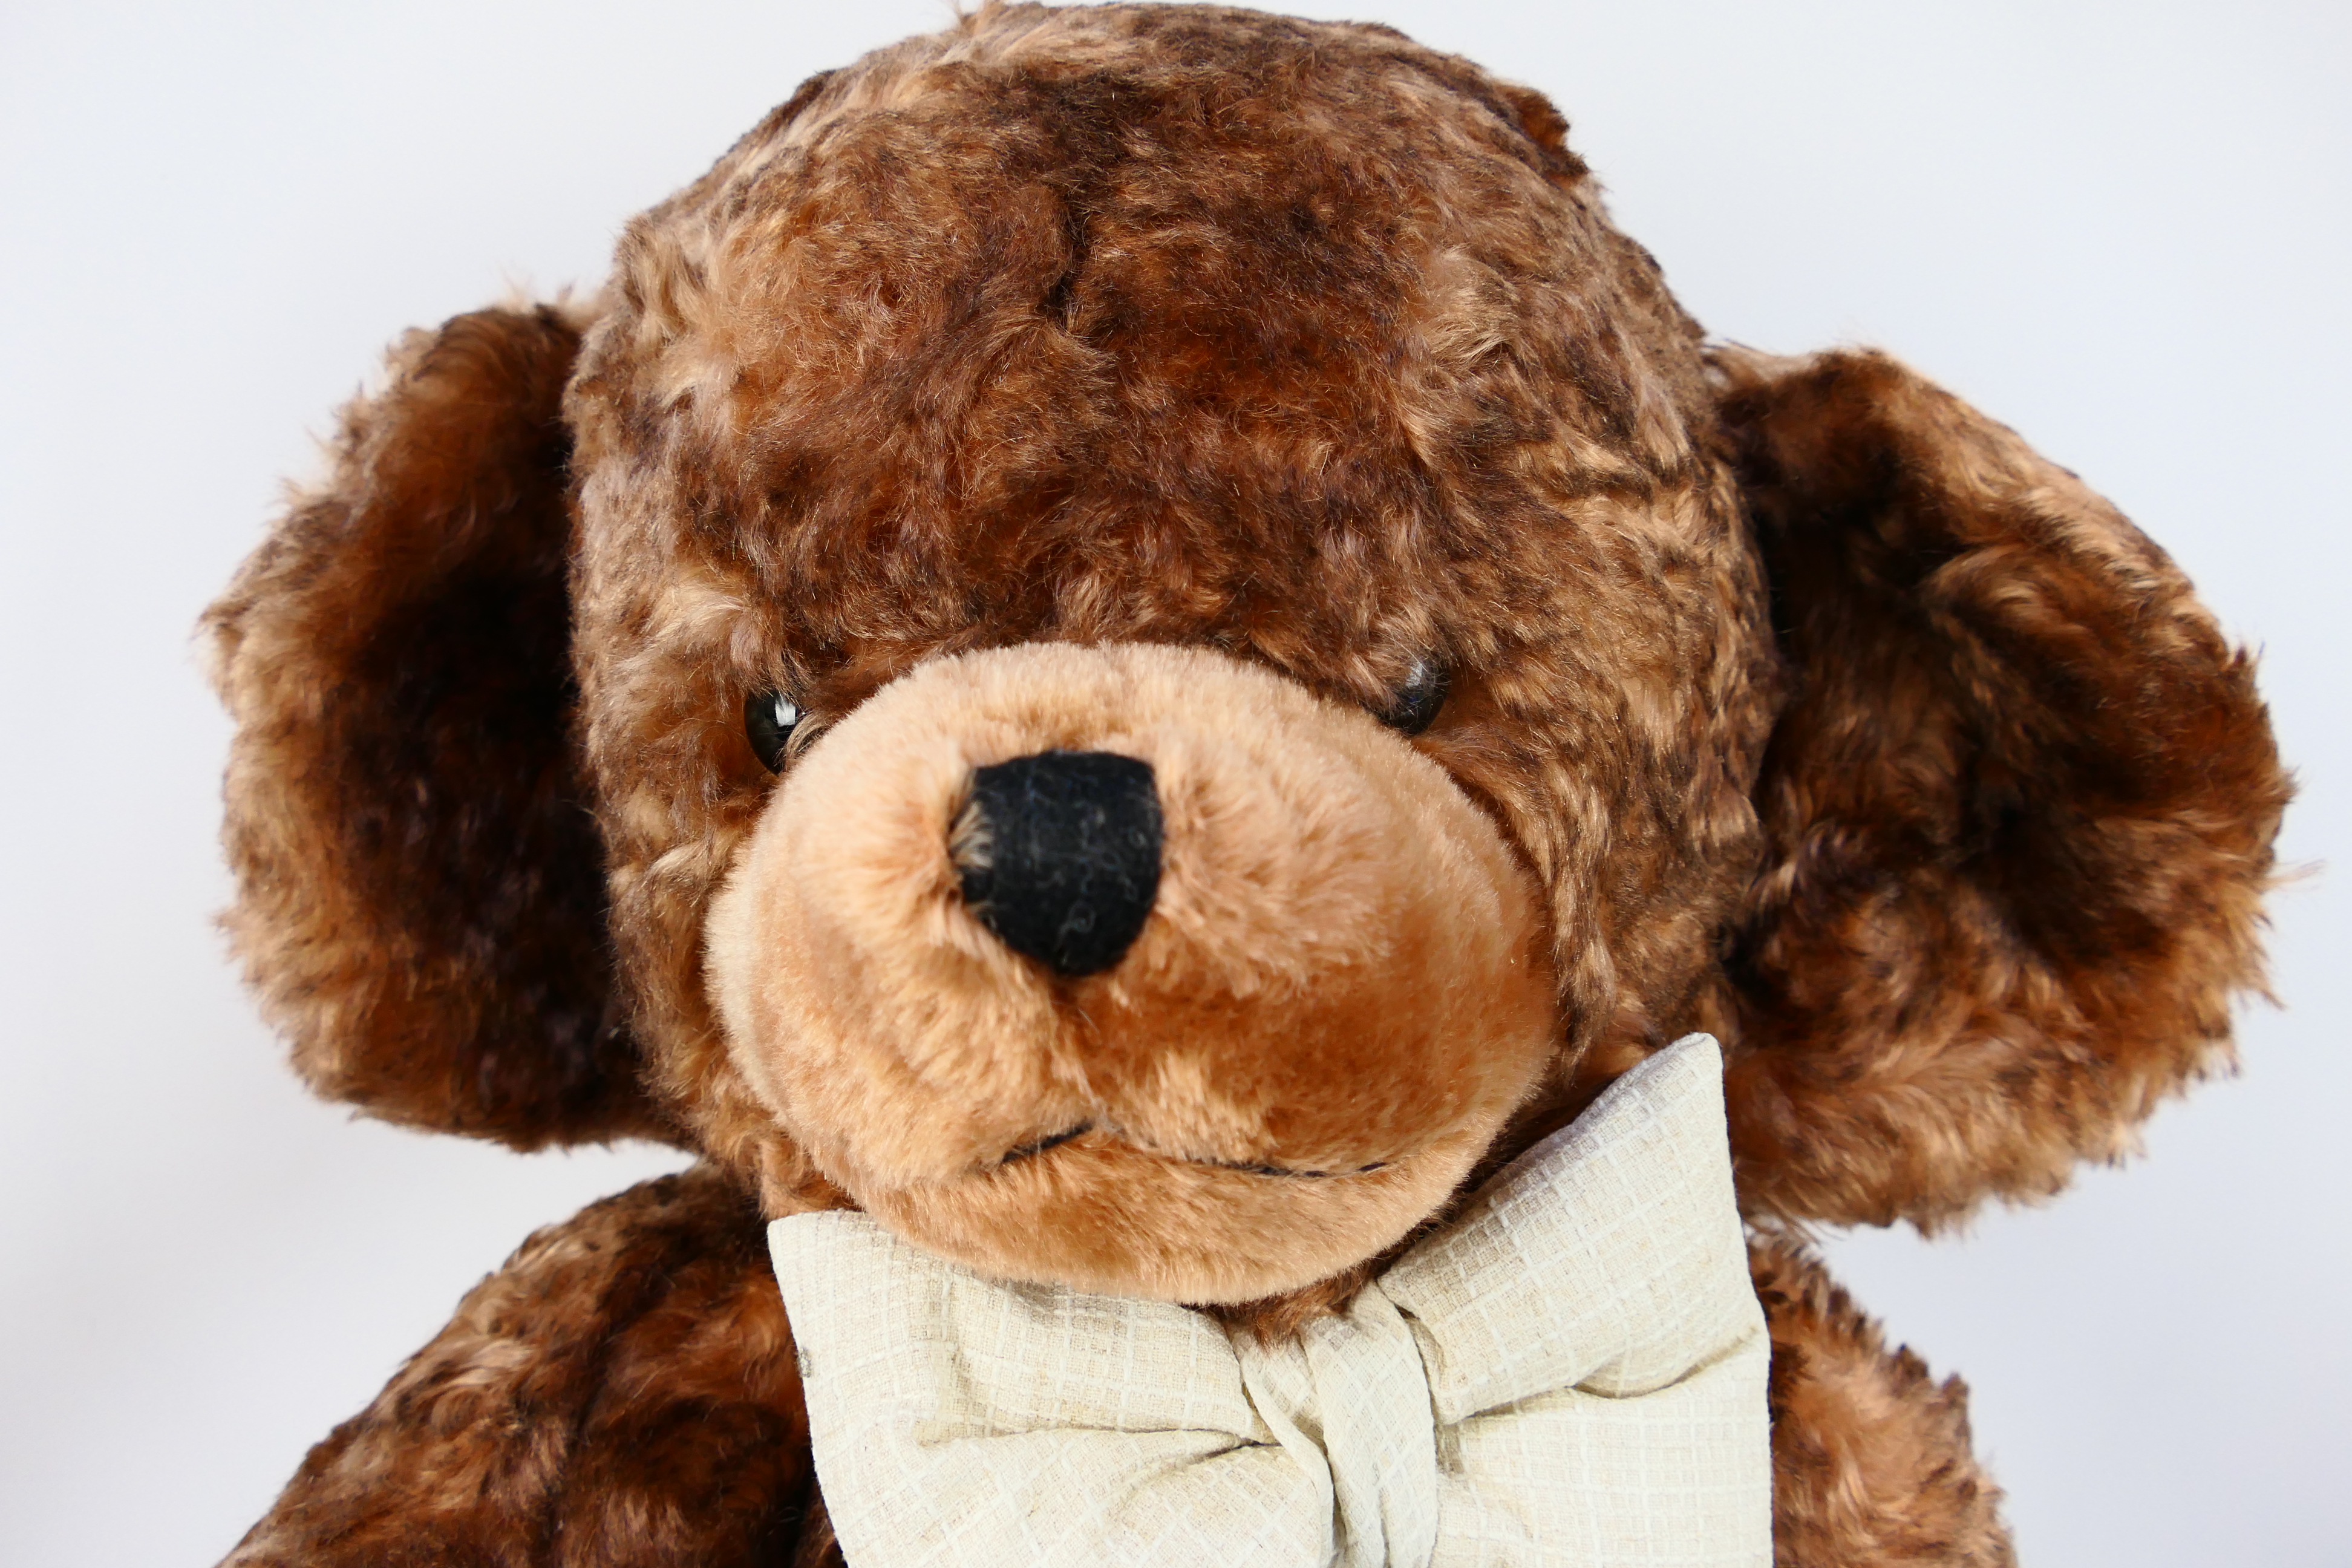 Merrythought - A large Merrythought jointed 'Millenium' teddy bear. - Image 2 of 7